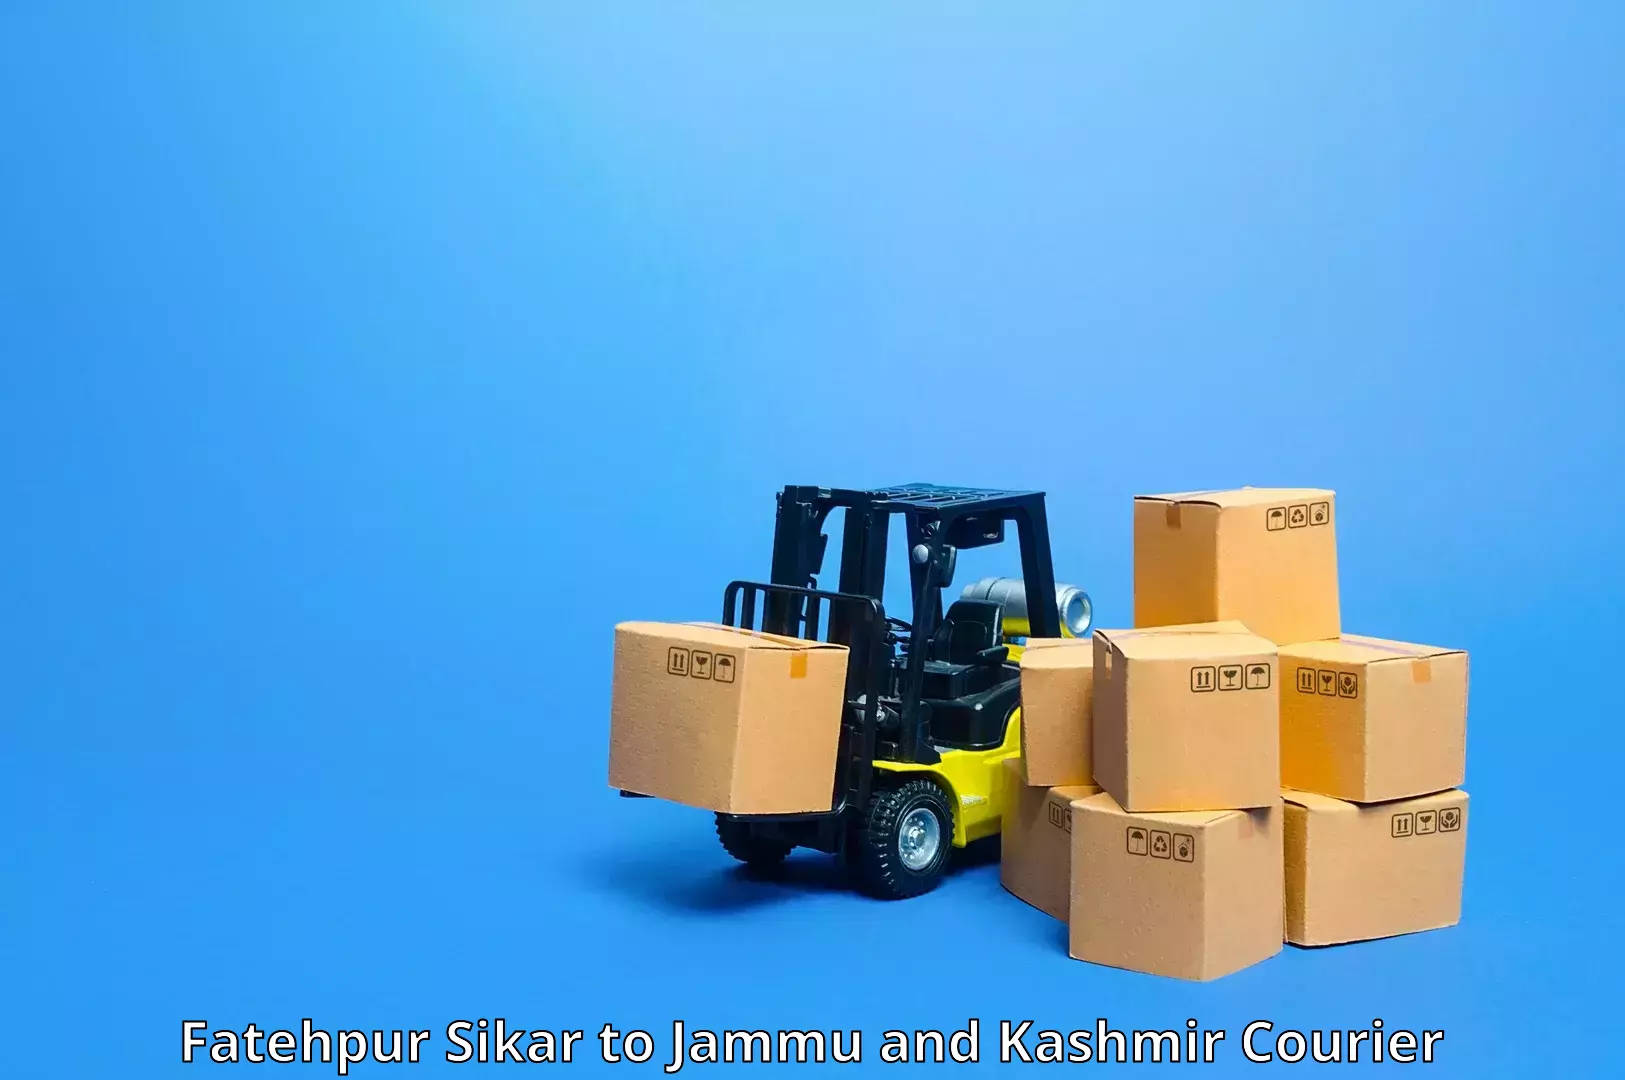 Reliable shipping solutions Fatehpur Sikar to Bandipur